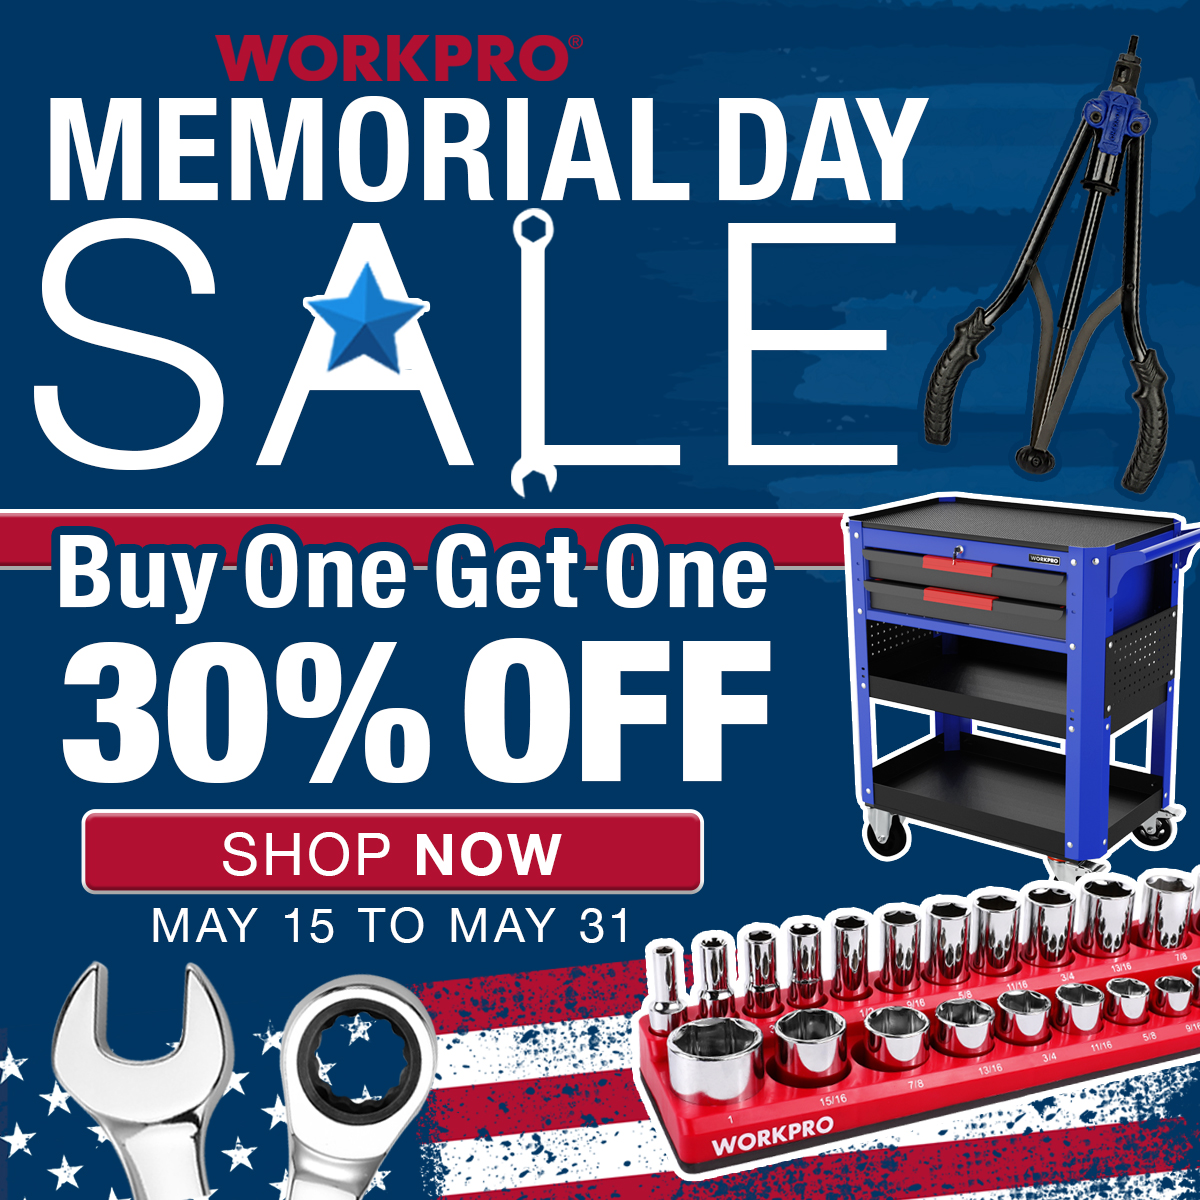 🇺🇸Head on over to workprotools.store to take advantage of our sitewide SALE! 📢BOGO 30% OFF everything! 
...
#workprotools #toolsale #tooldeals #diytools #toolsofthetrade #mechanictools #toolsets #toolset #gardeningtools